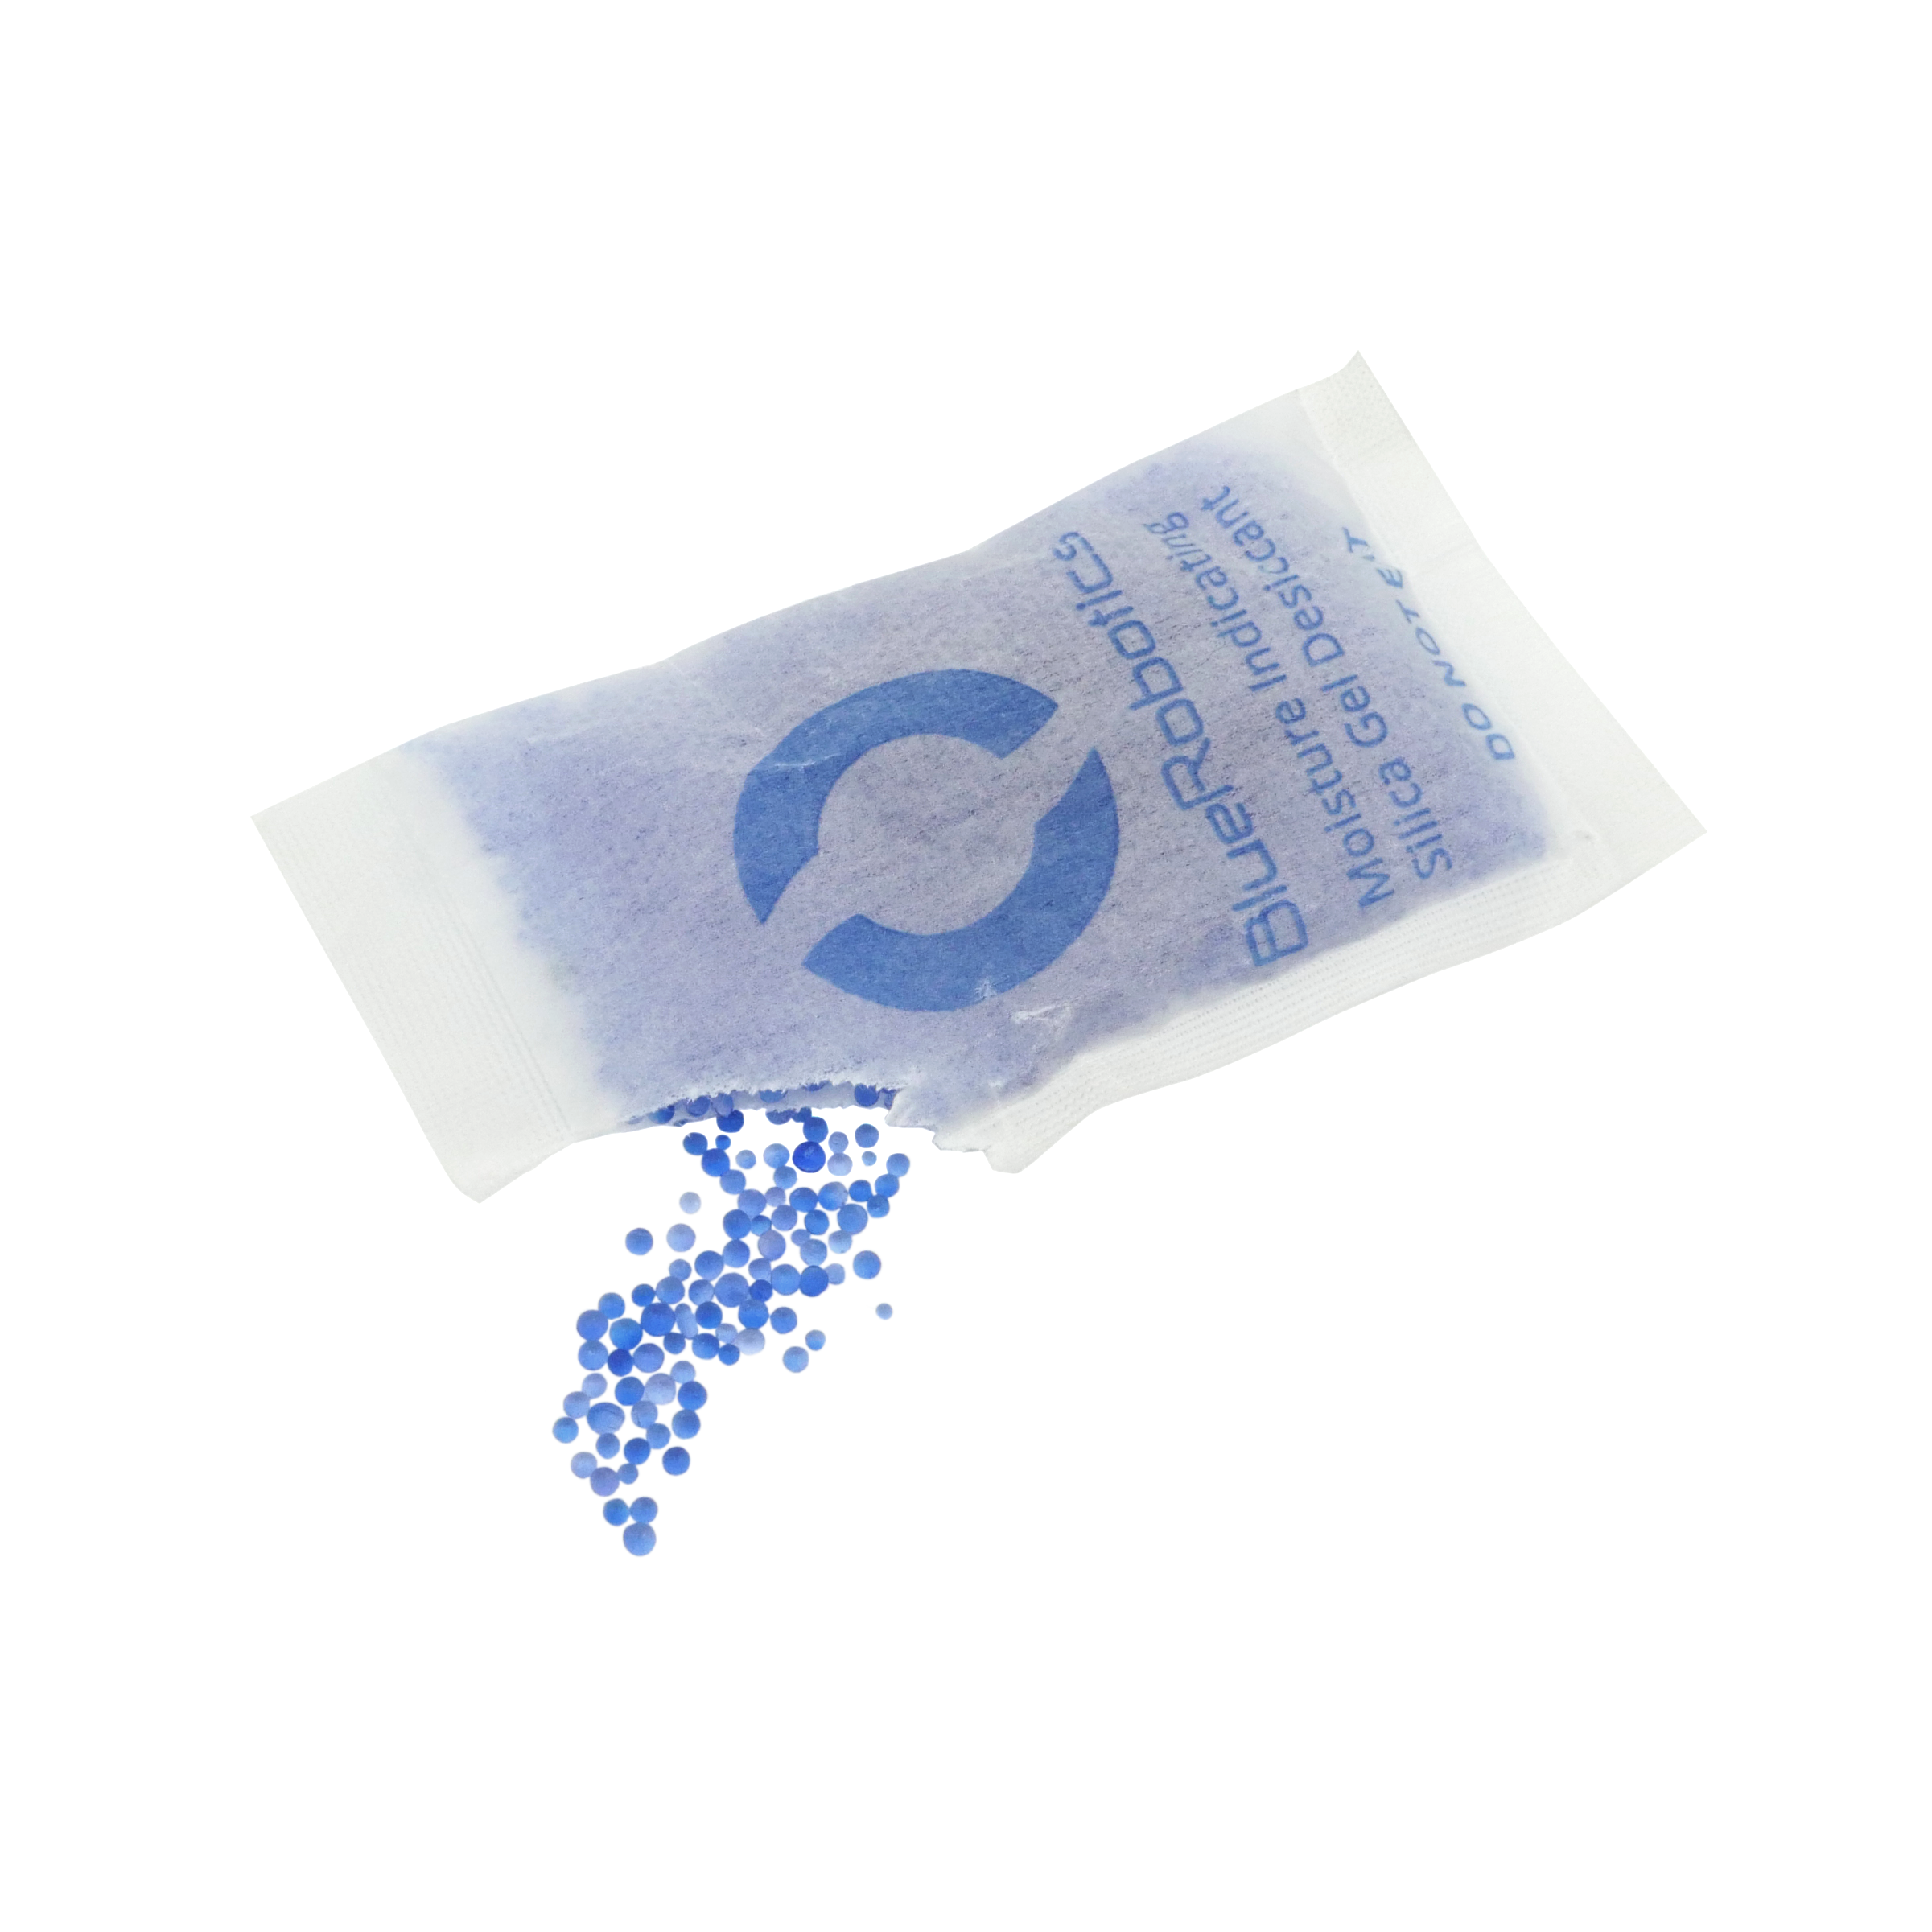 RS PRO, RS PRO , Silica Gel, 50g, 601-057